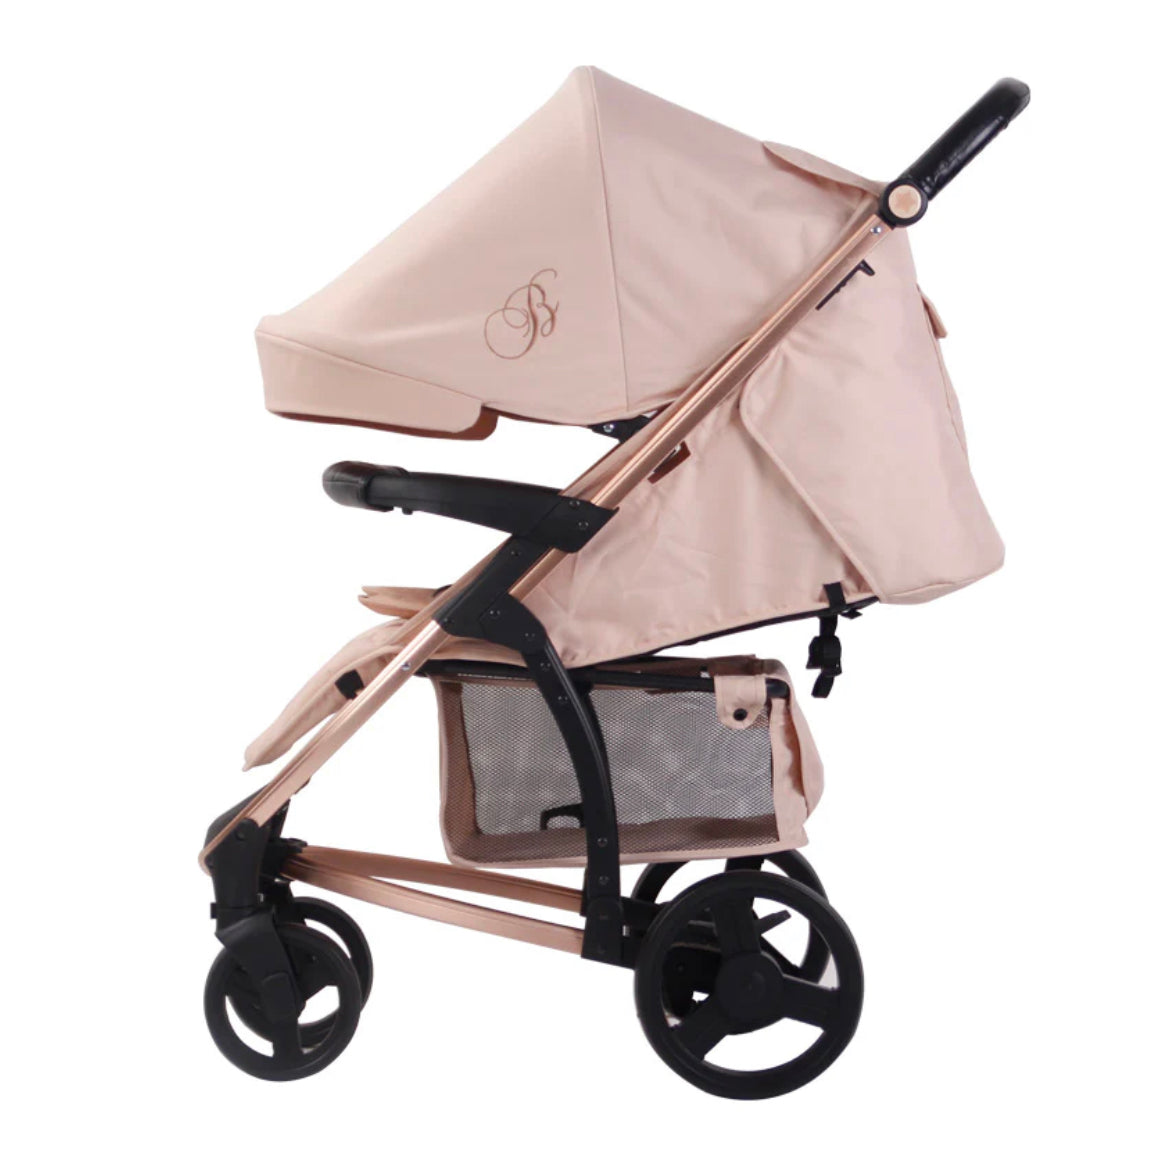 MB200i Billie Faiers Blush iSize Travel System